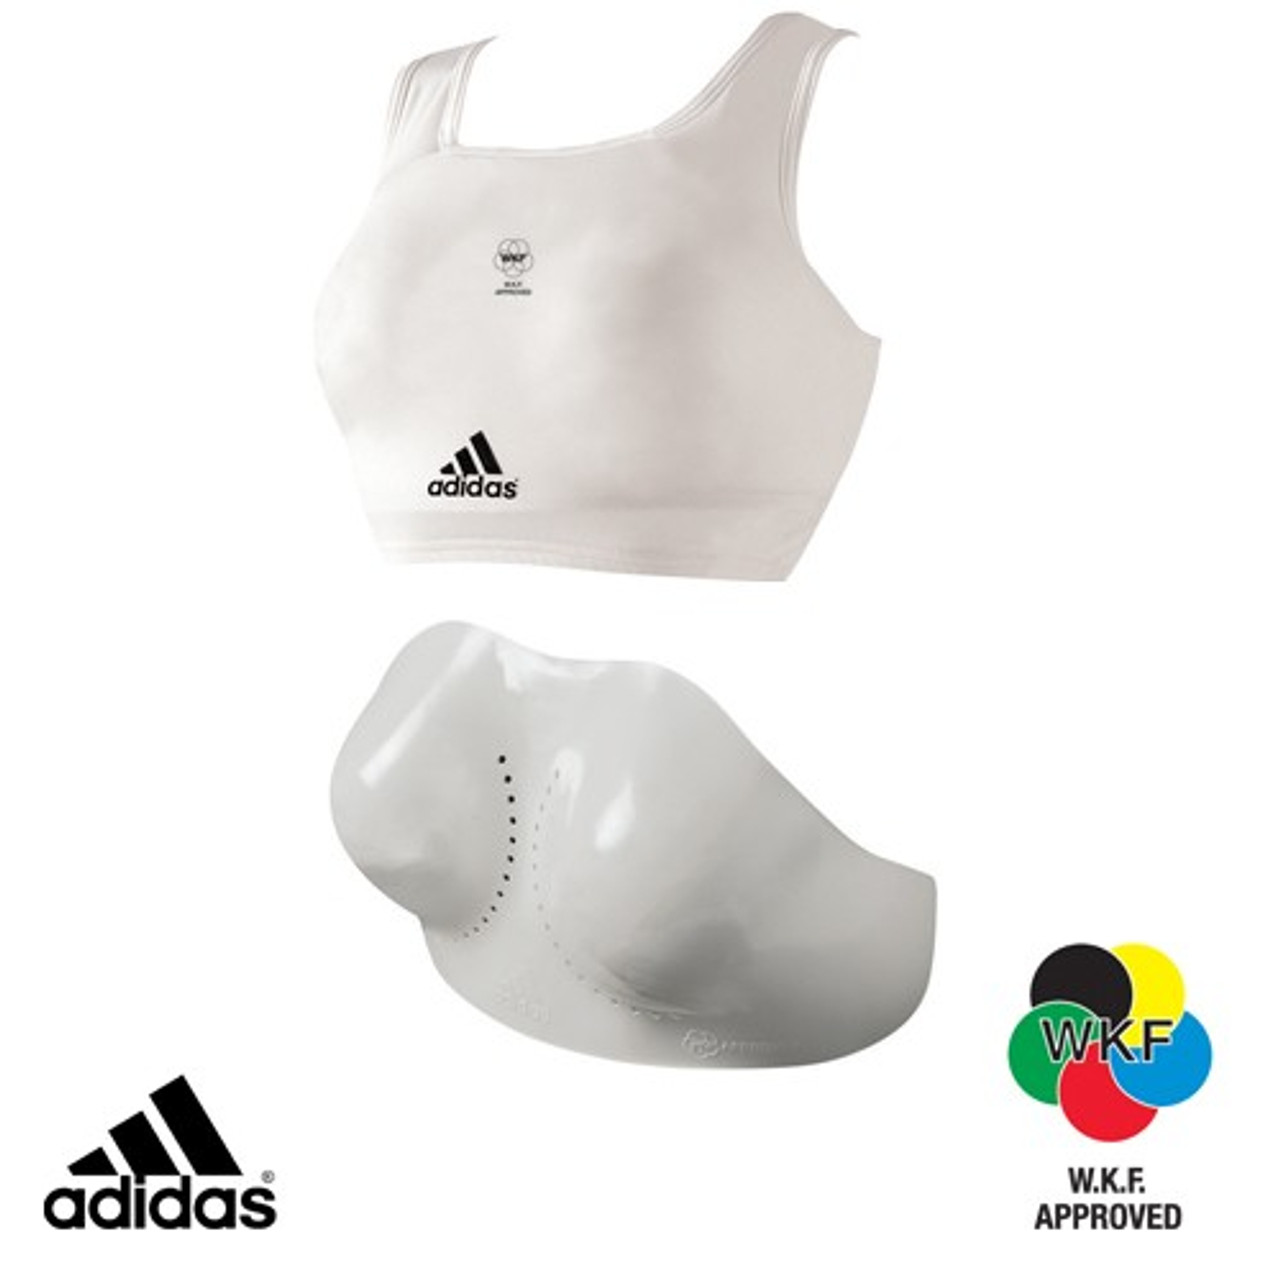 adidas female chest protector